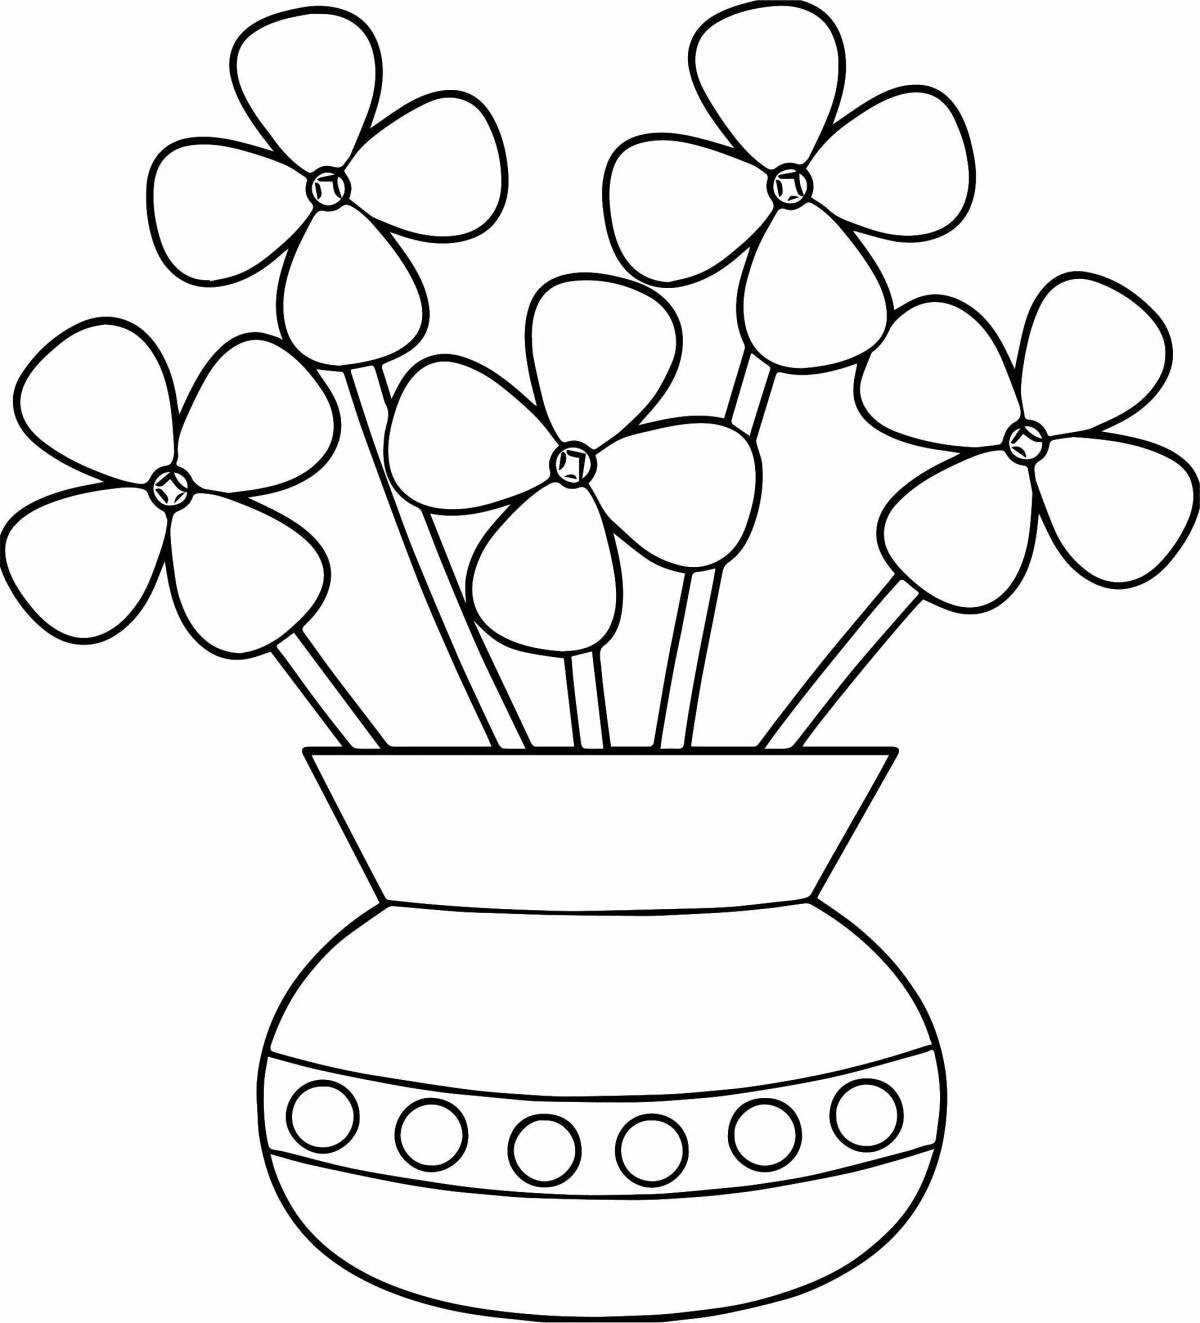 A bunch of delightful coloring pages for children